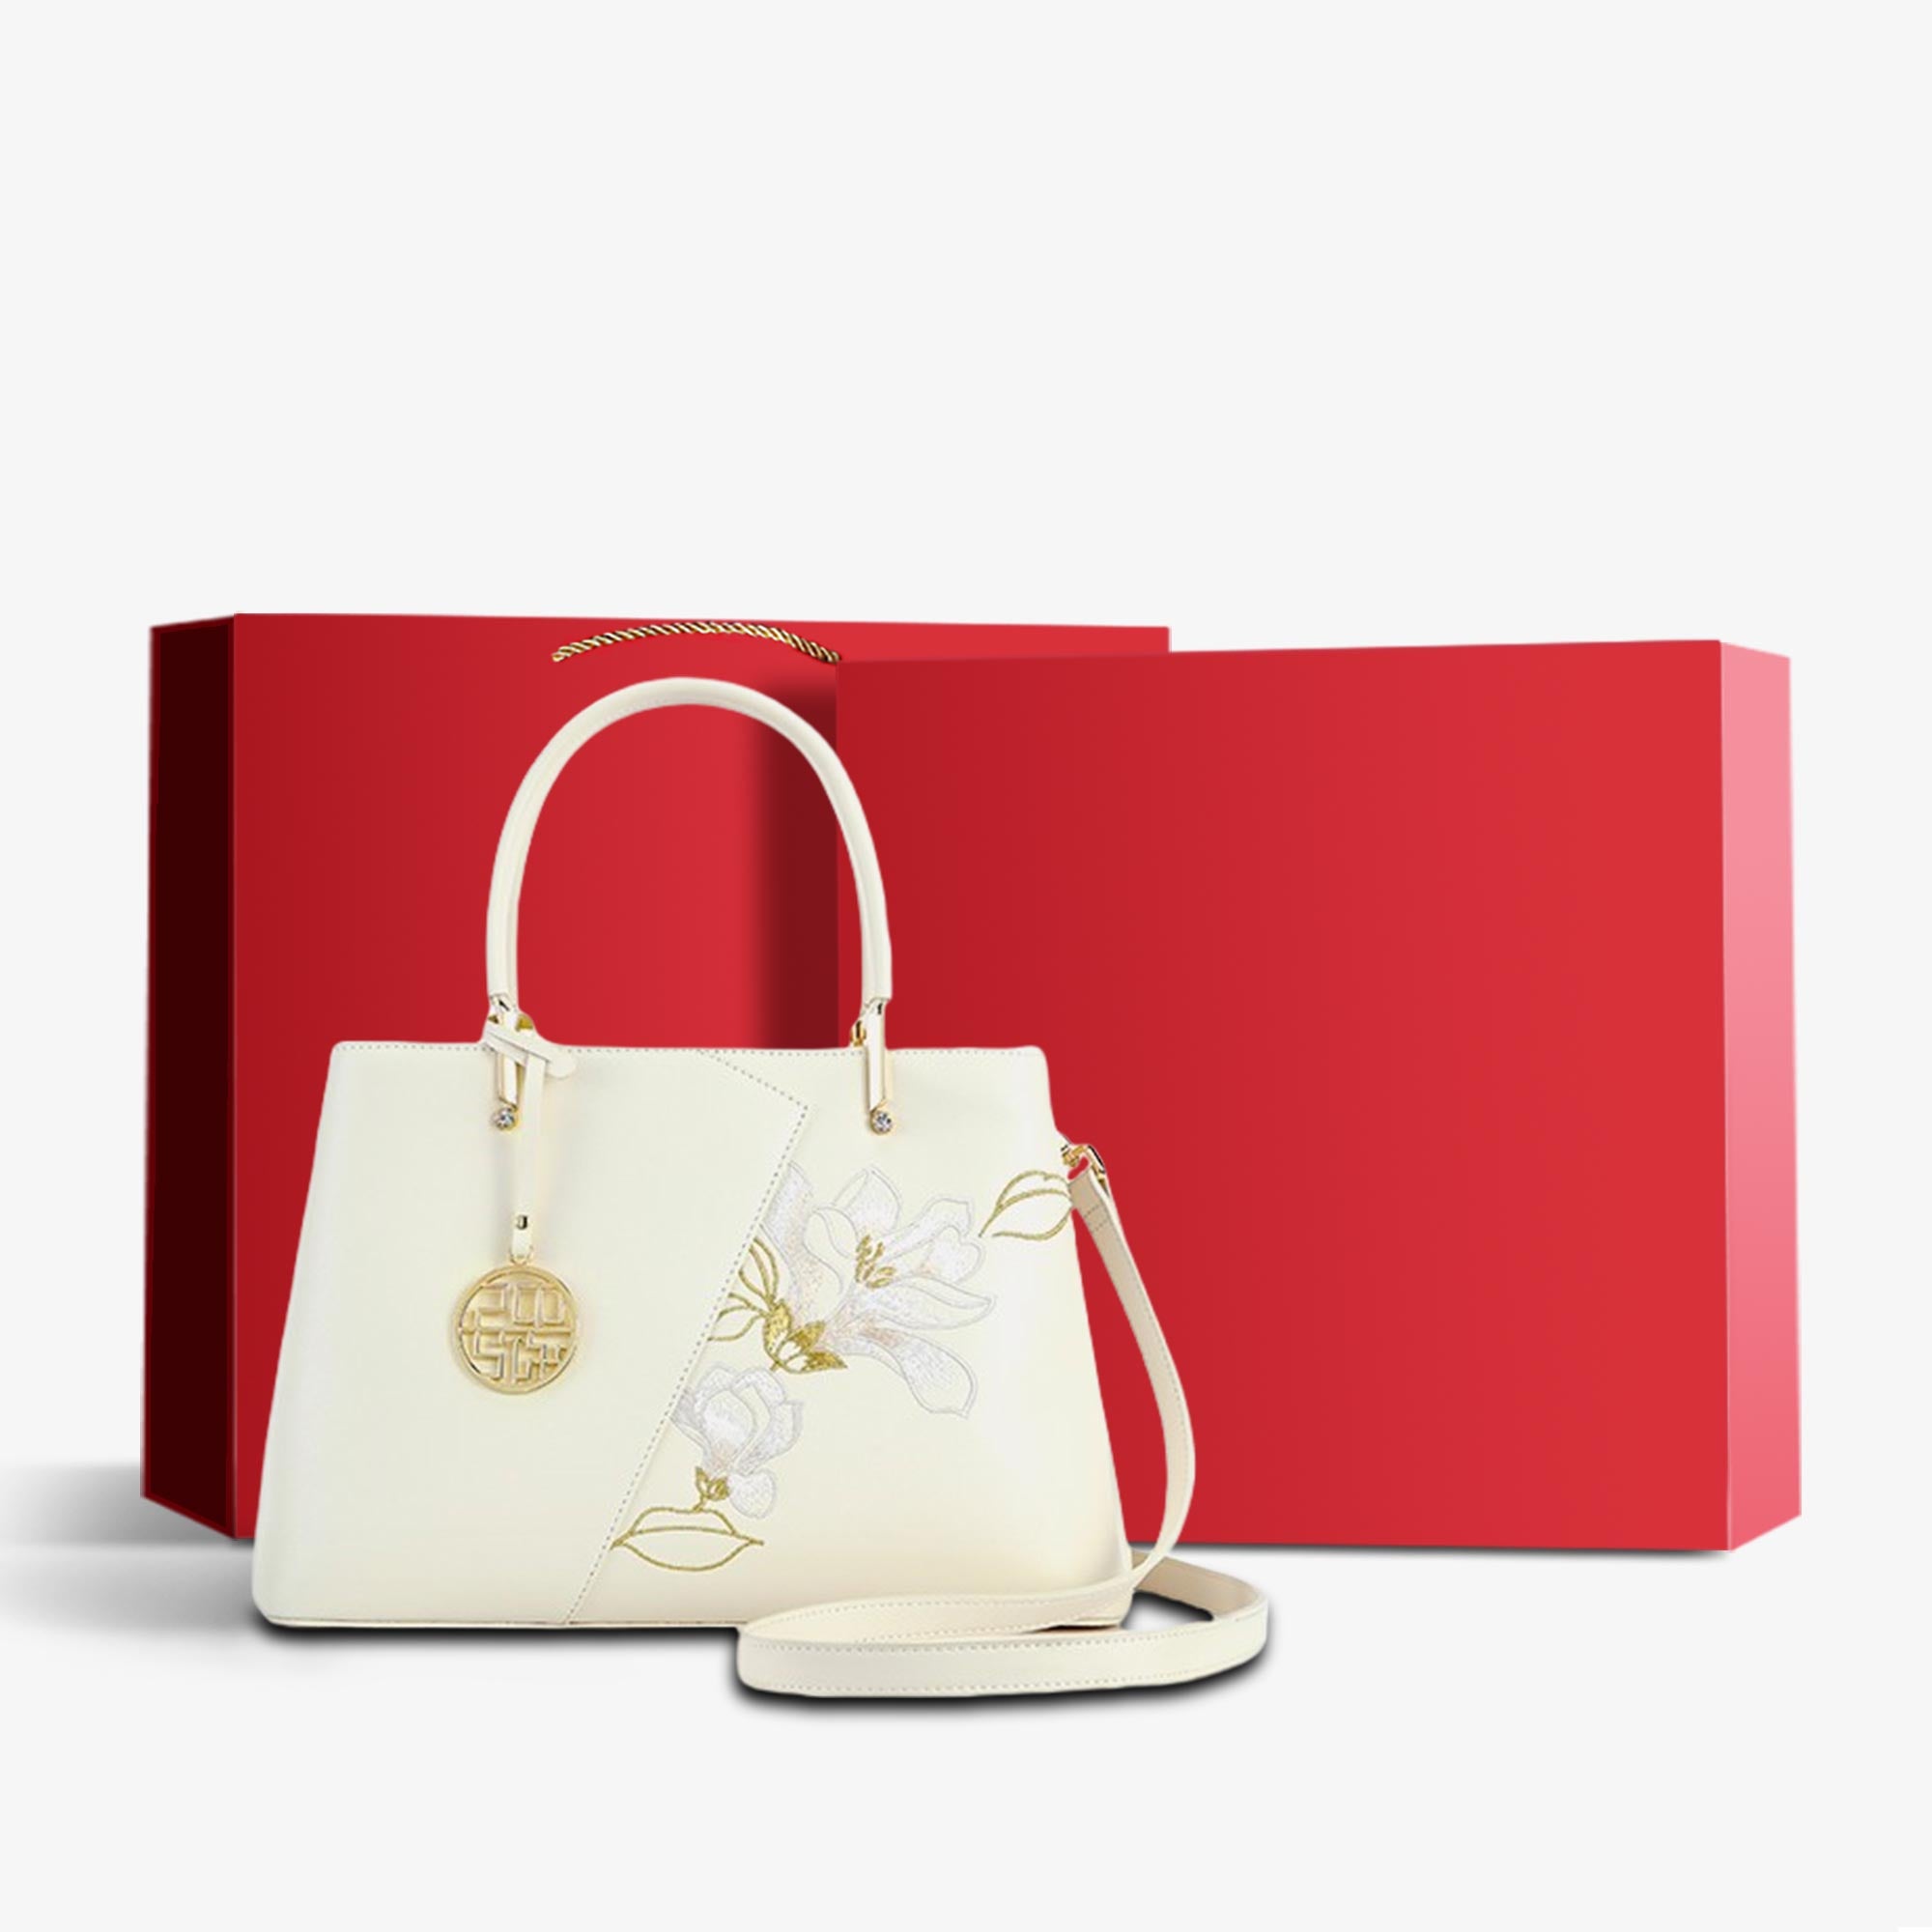 Embroidery Leather Magnolia Leather Tote Bag-Tote Bag-SinoCultural-White-Bag with Gift Box-P120348-3-g-SinoCultural